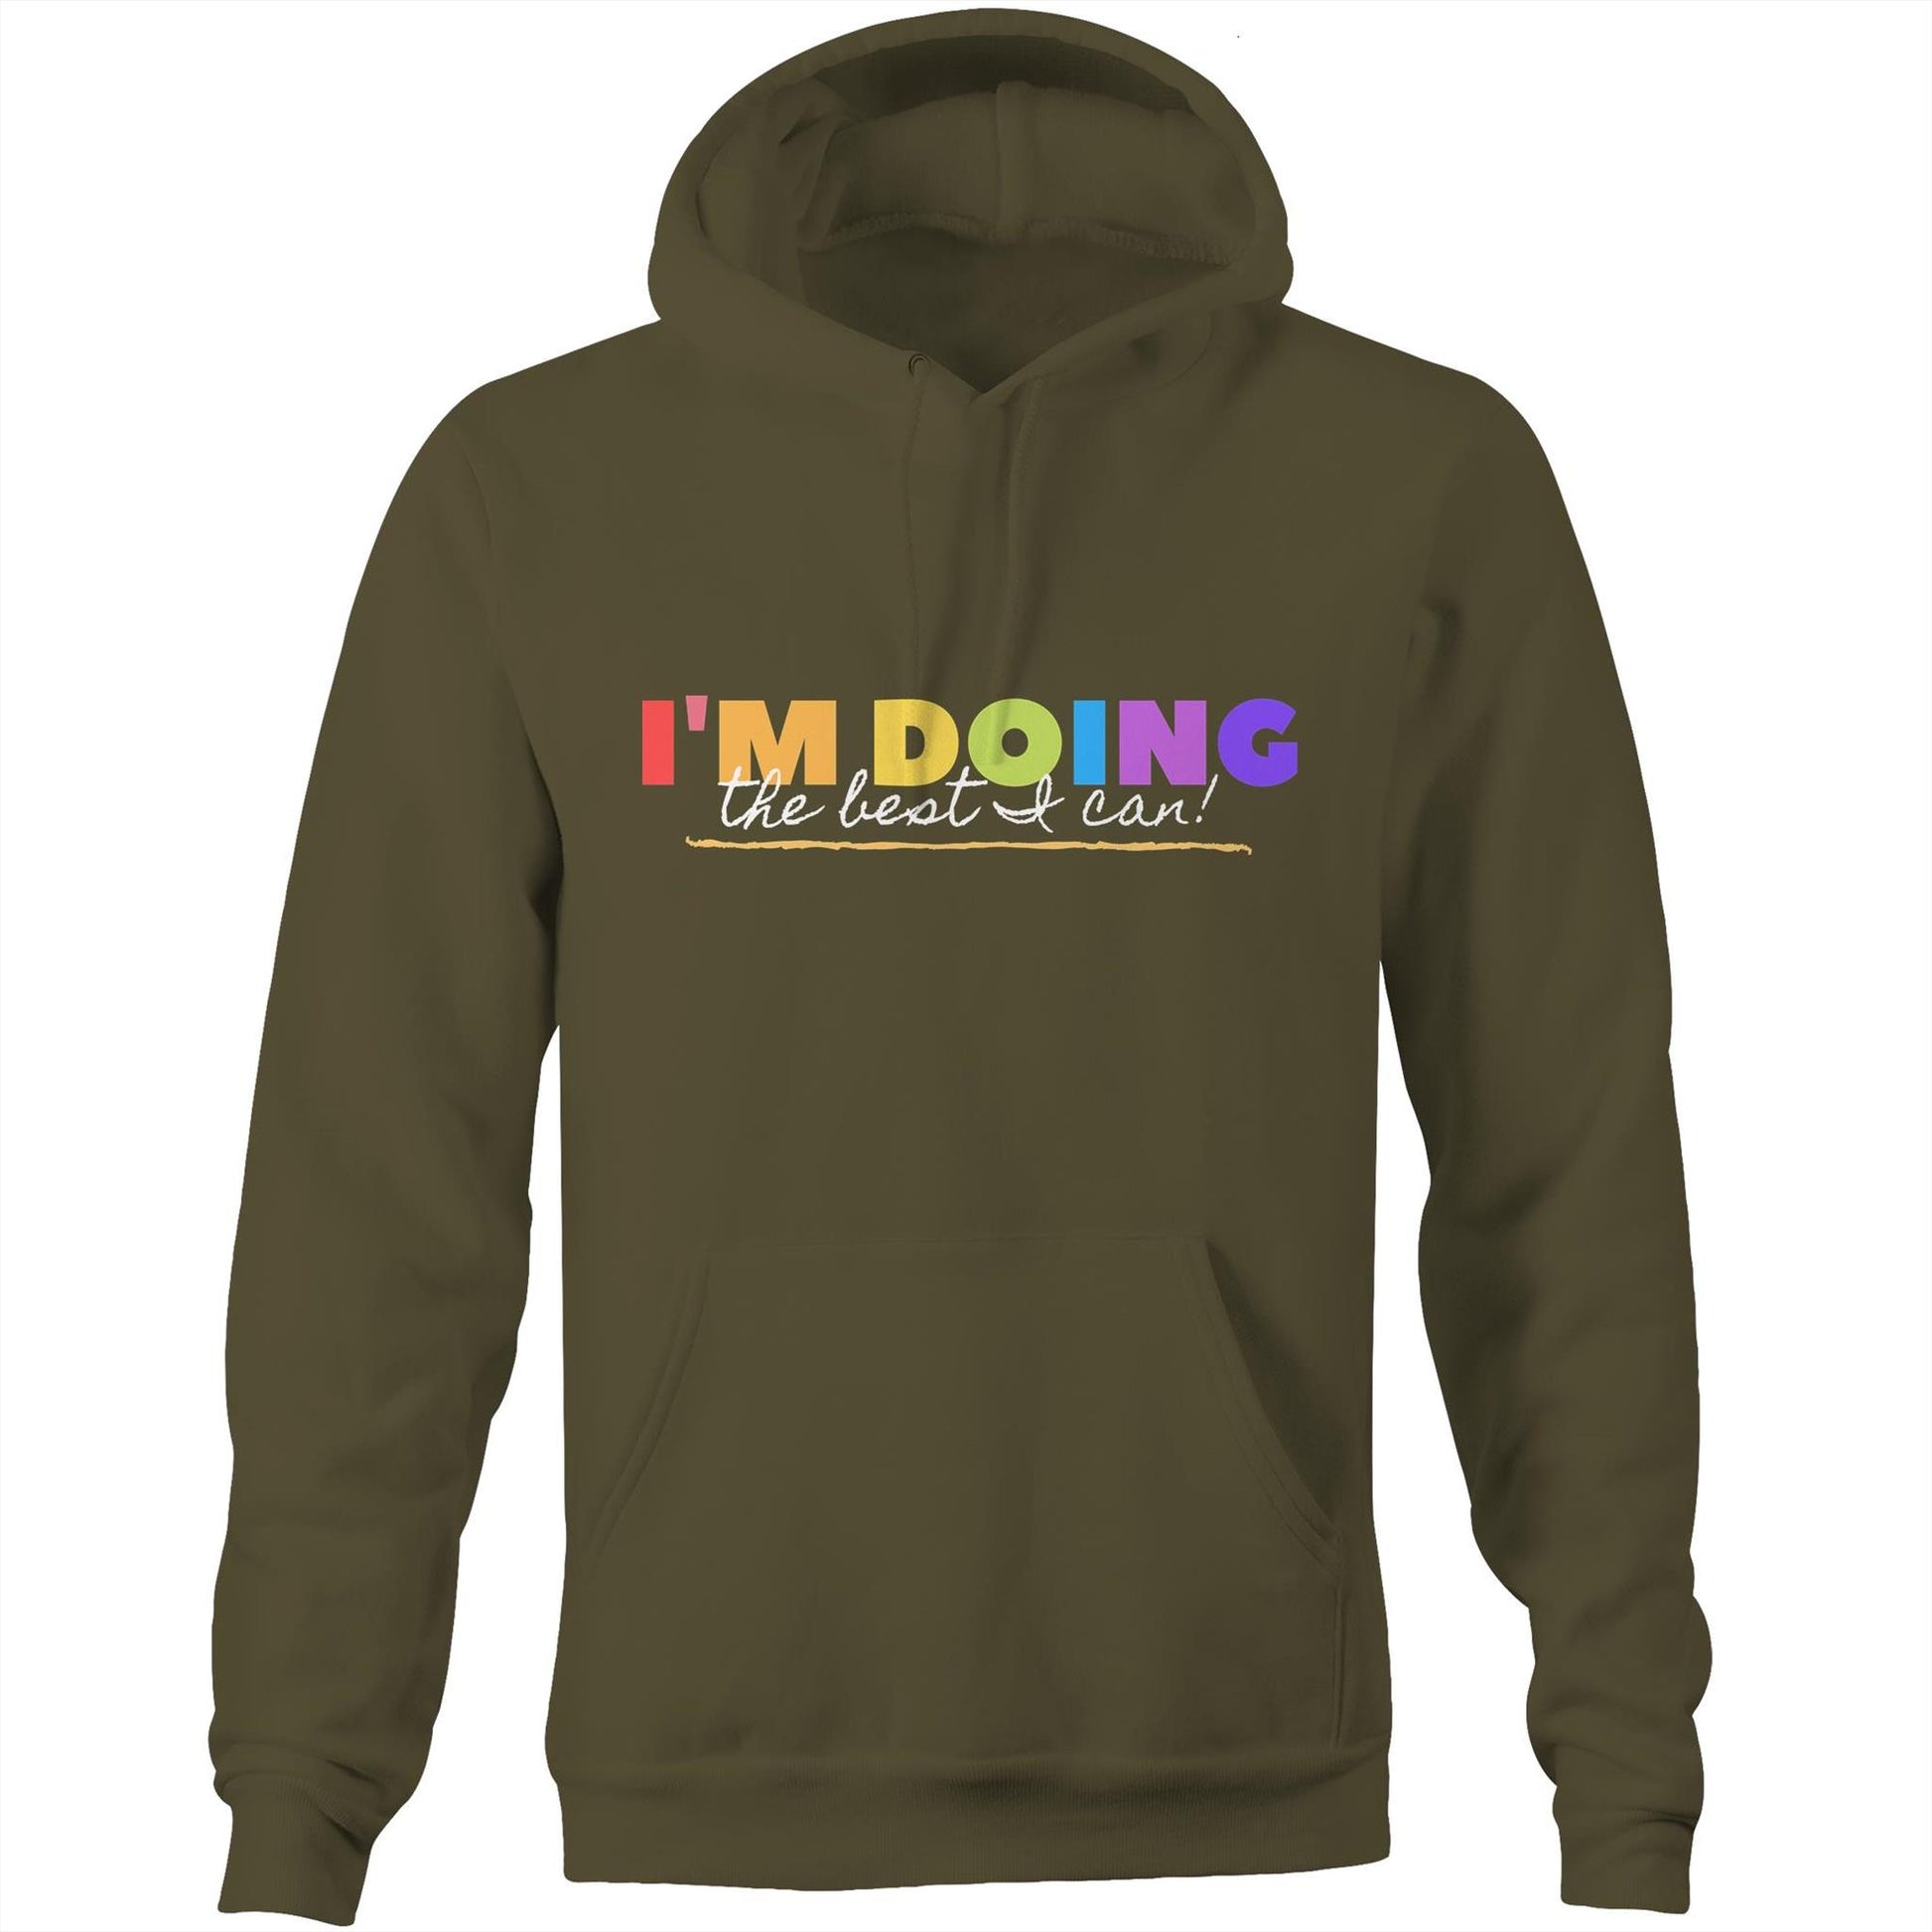 I'm Doing The Best I Can - Pocket Hoodie Sweatshirt Army Hoodie Motivation